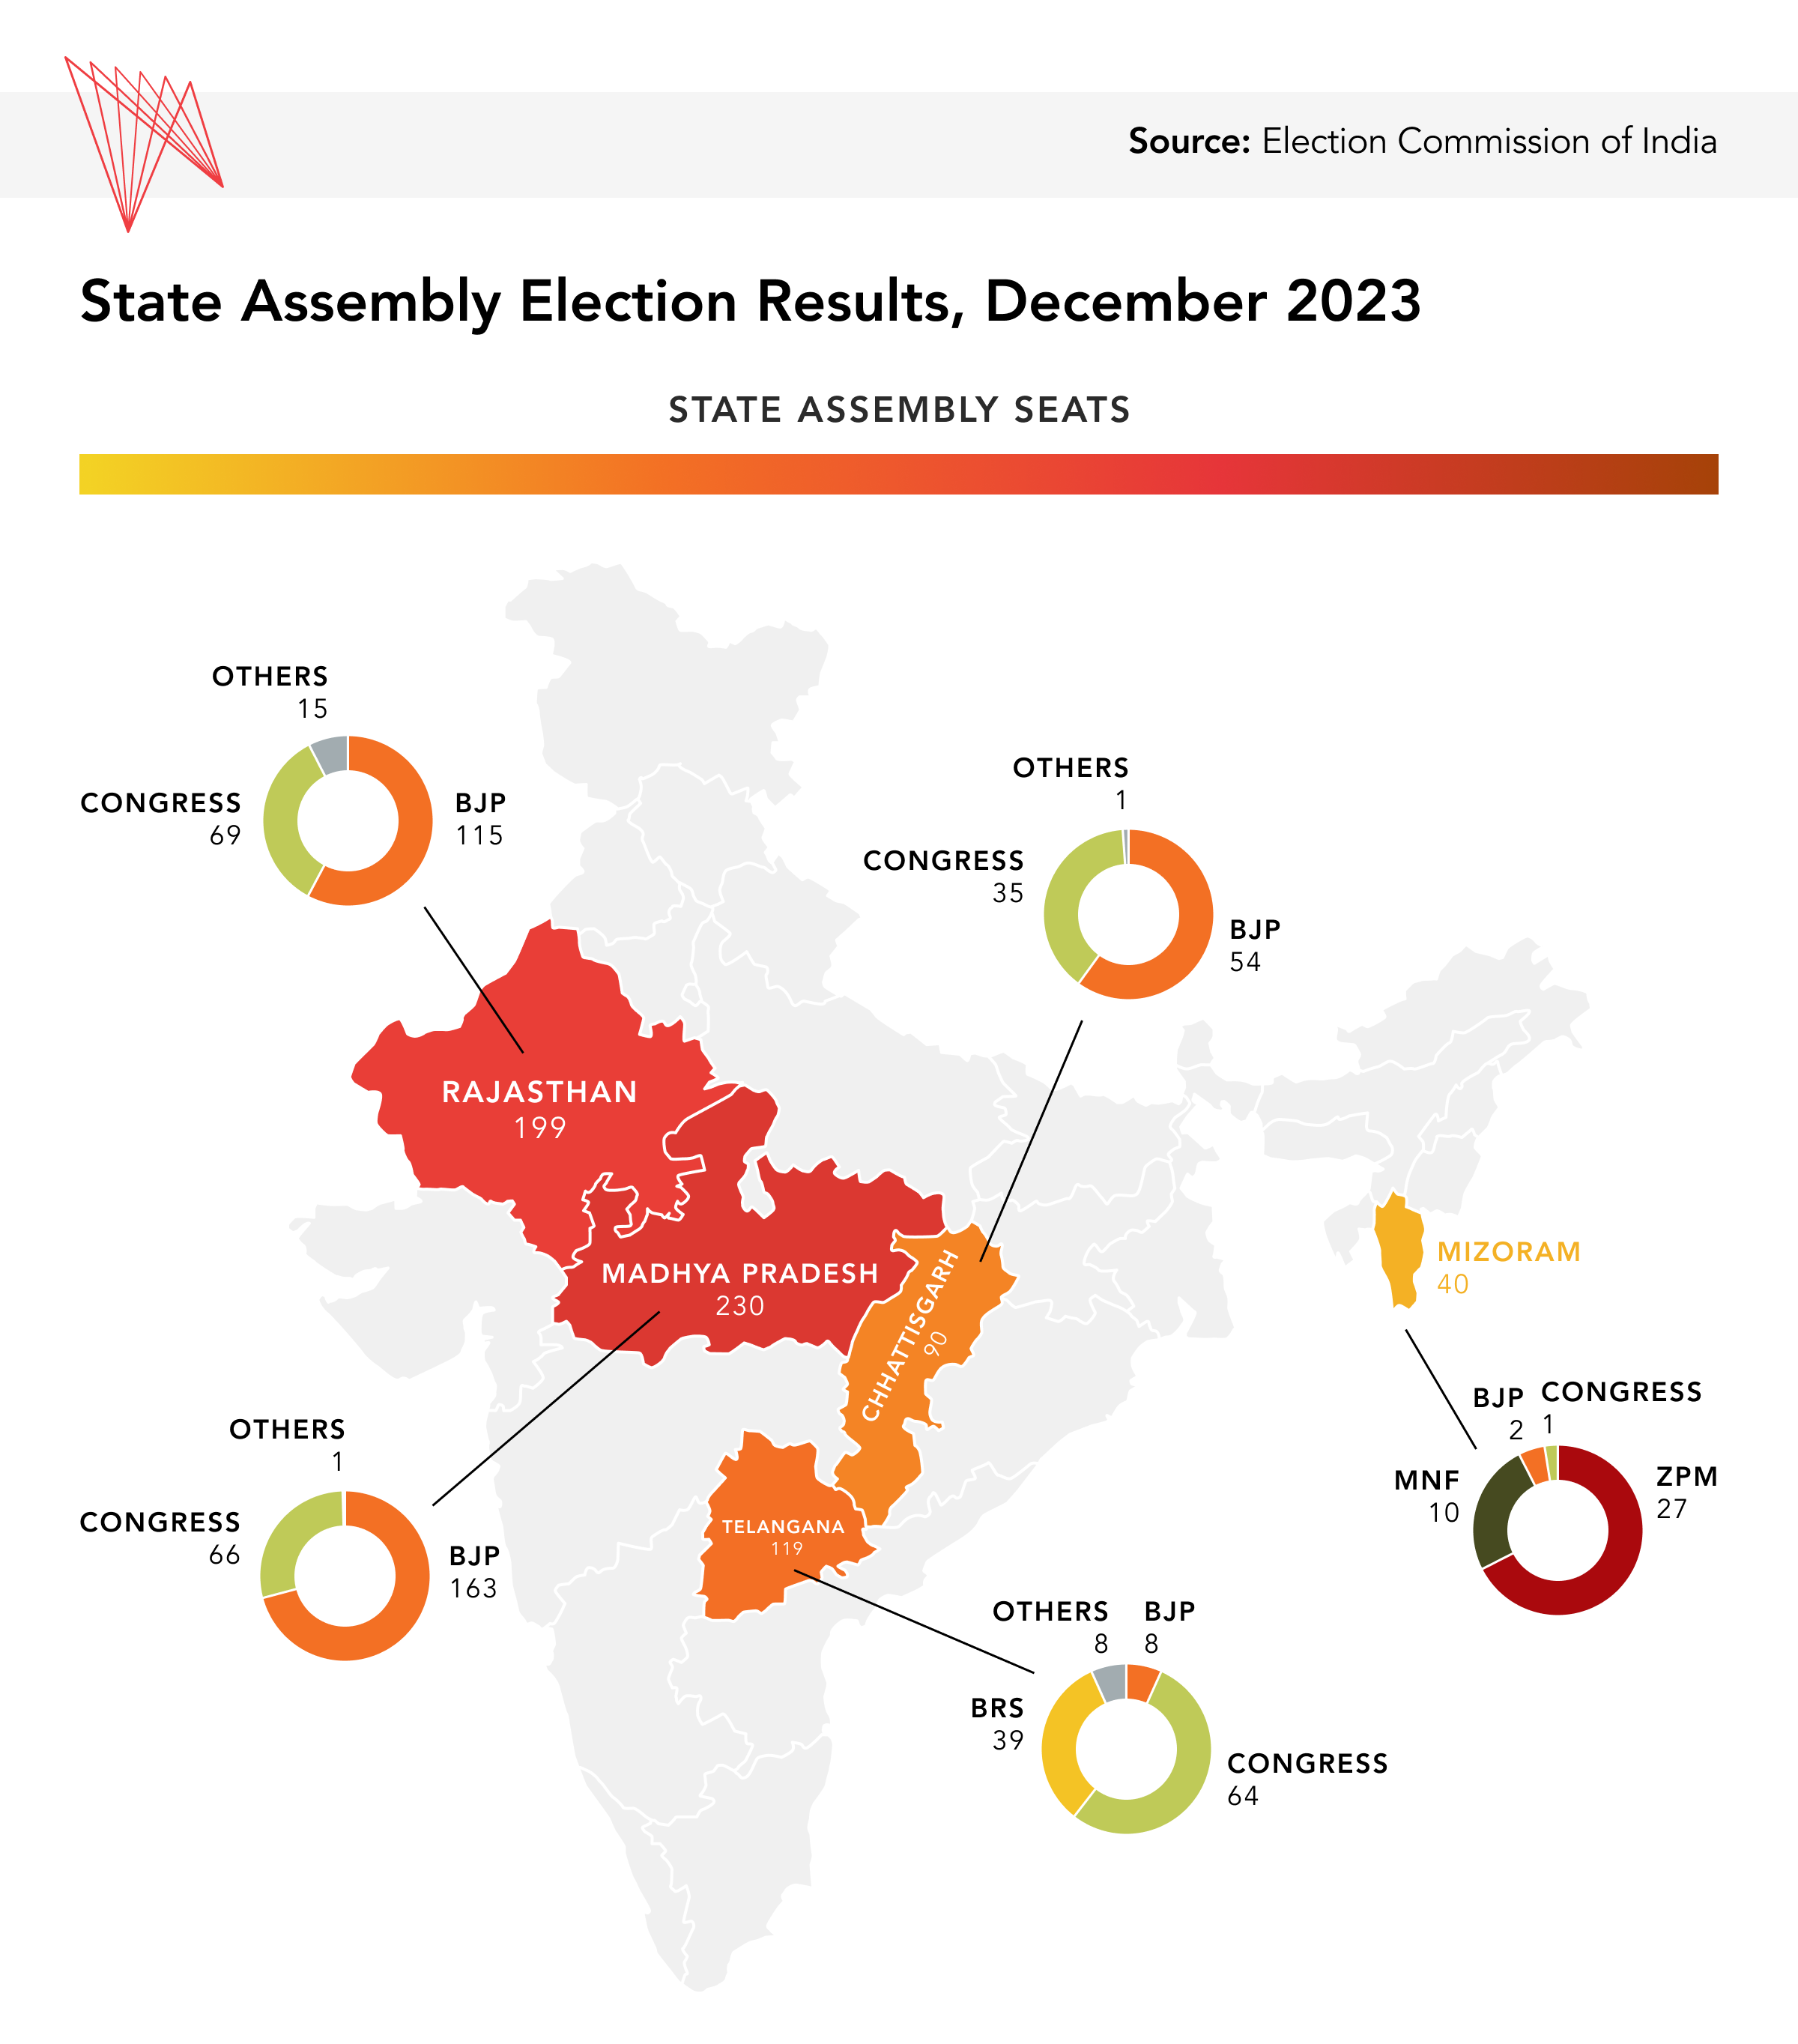 State Assembly Election Results India 2023